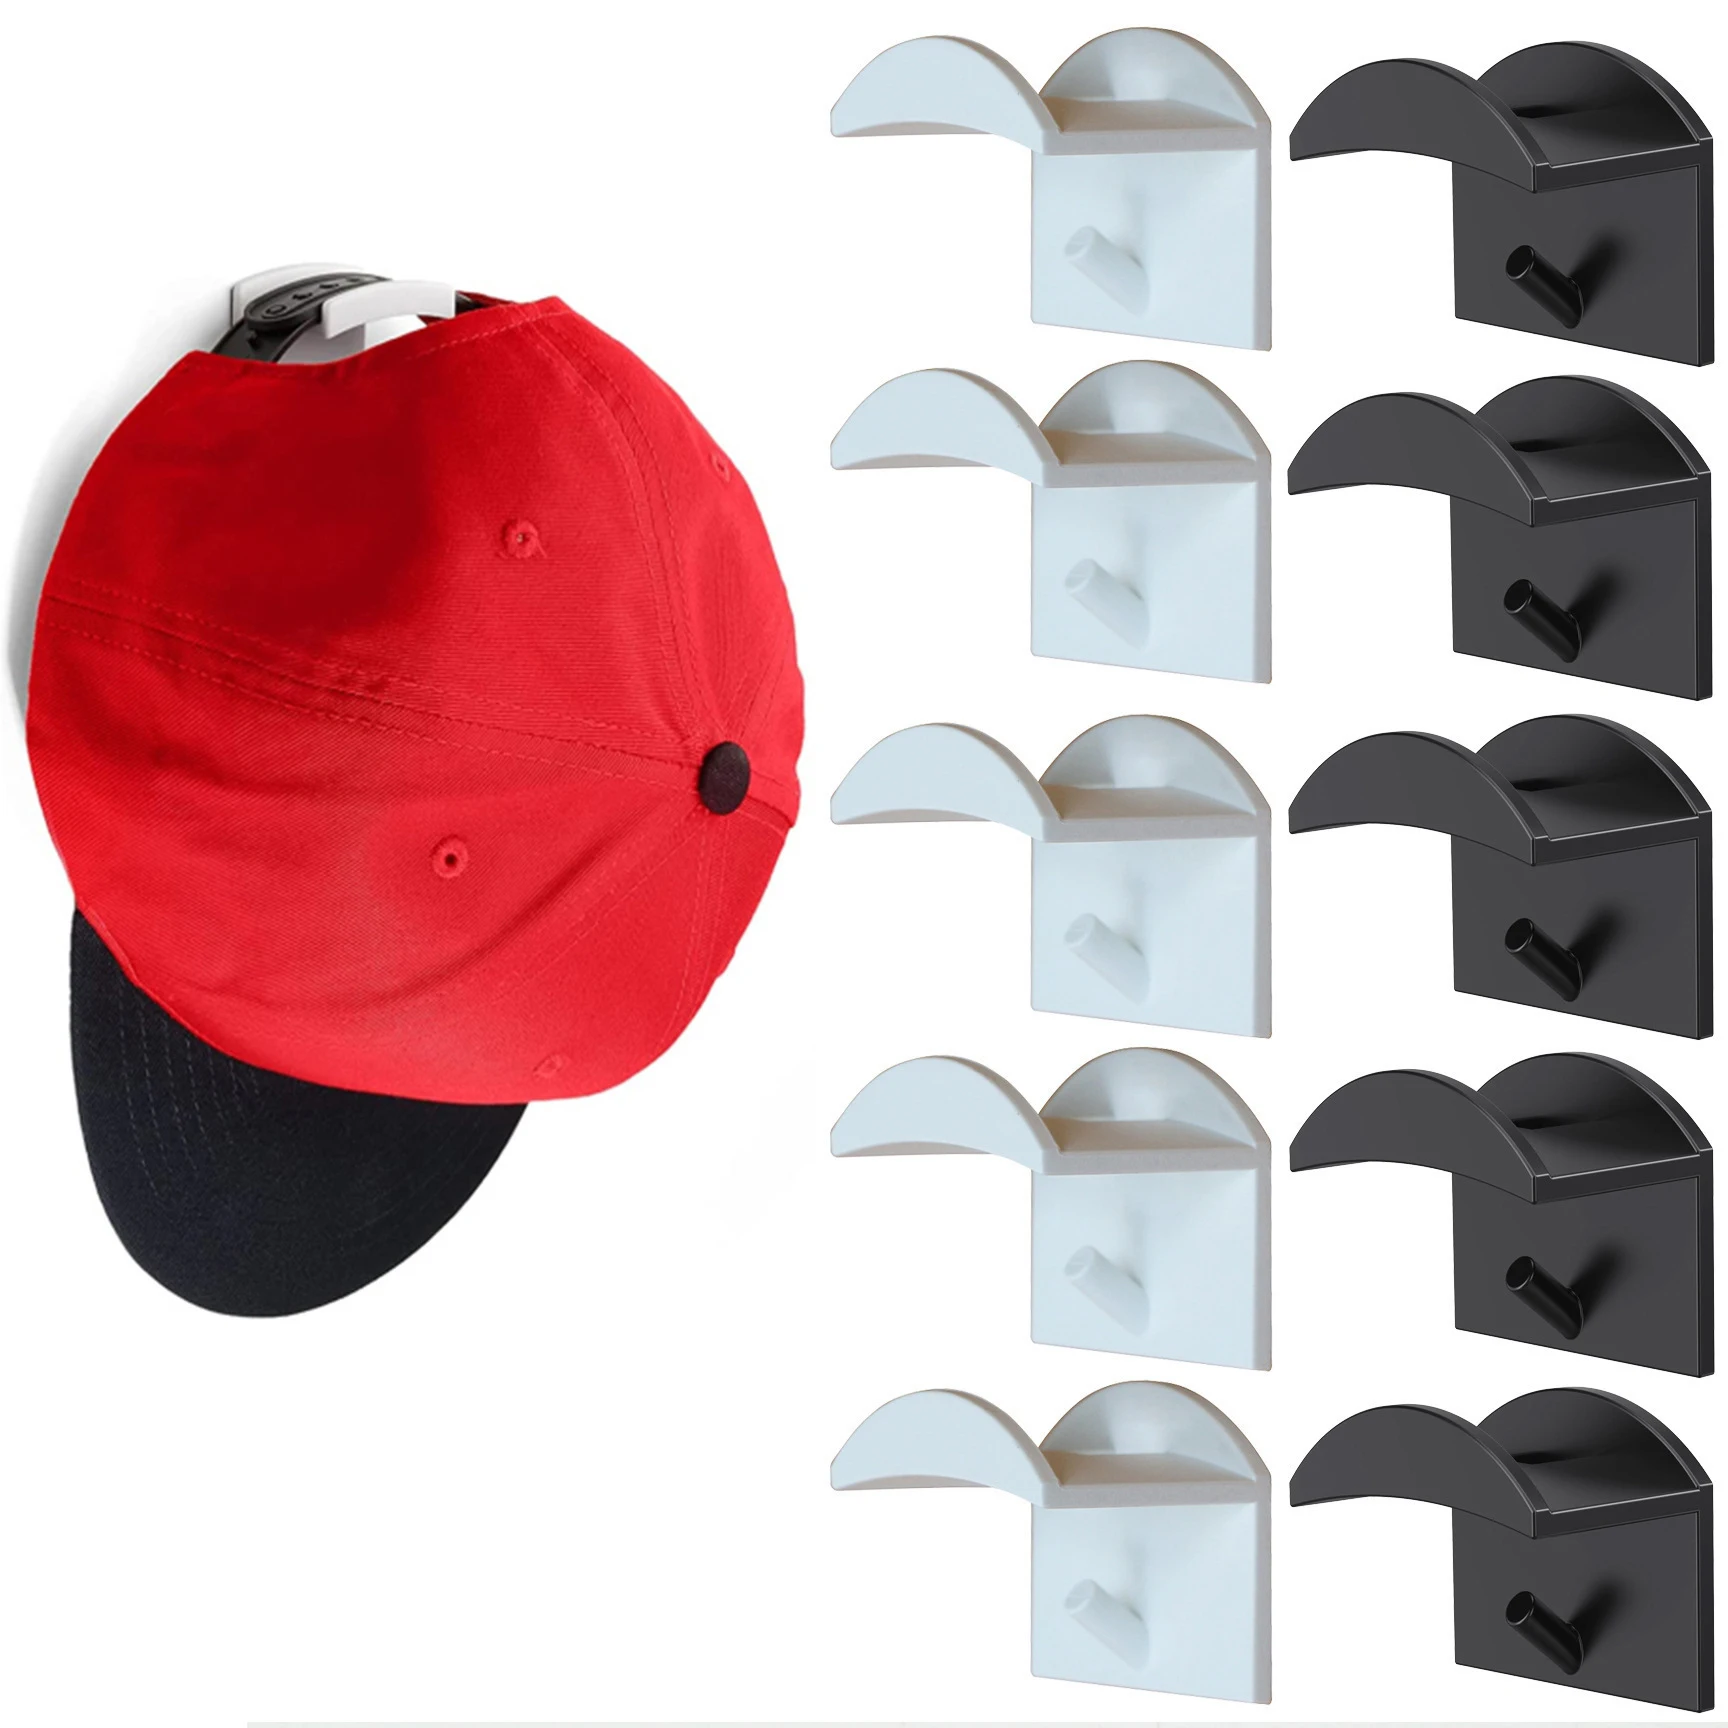 

4/10pcs Hat Holder Sticky Wall Mount Hook for Baseball Cap Casual Hat Storage Box No Drilling Paste Portable Door Closet Hanger